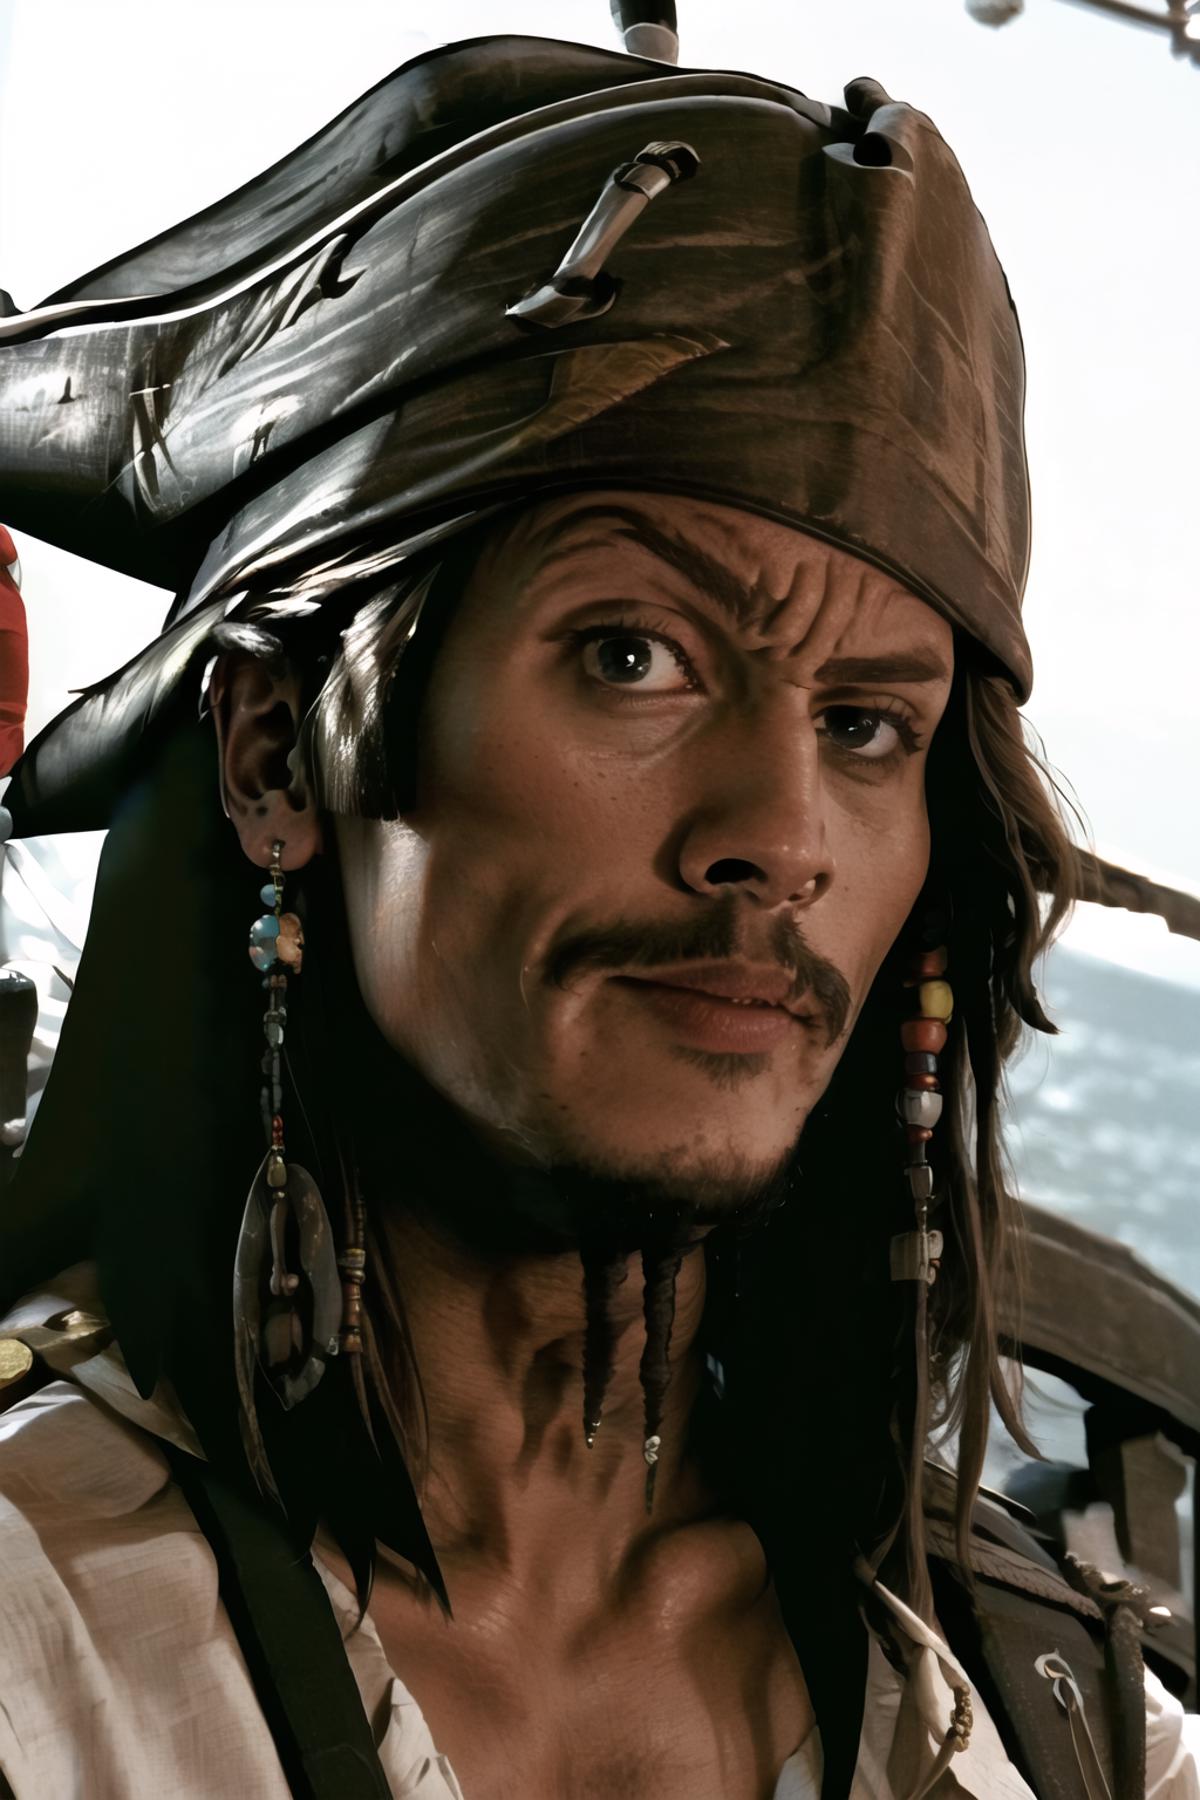 A man with a pirate hat and eyeliner looking at the camera.